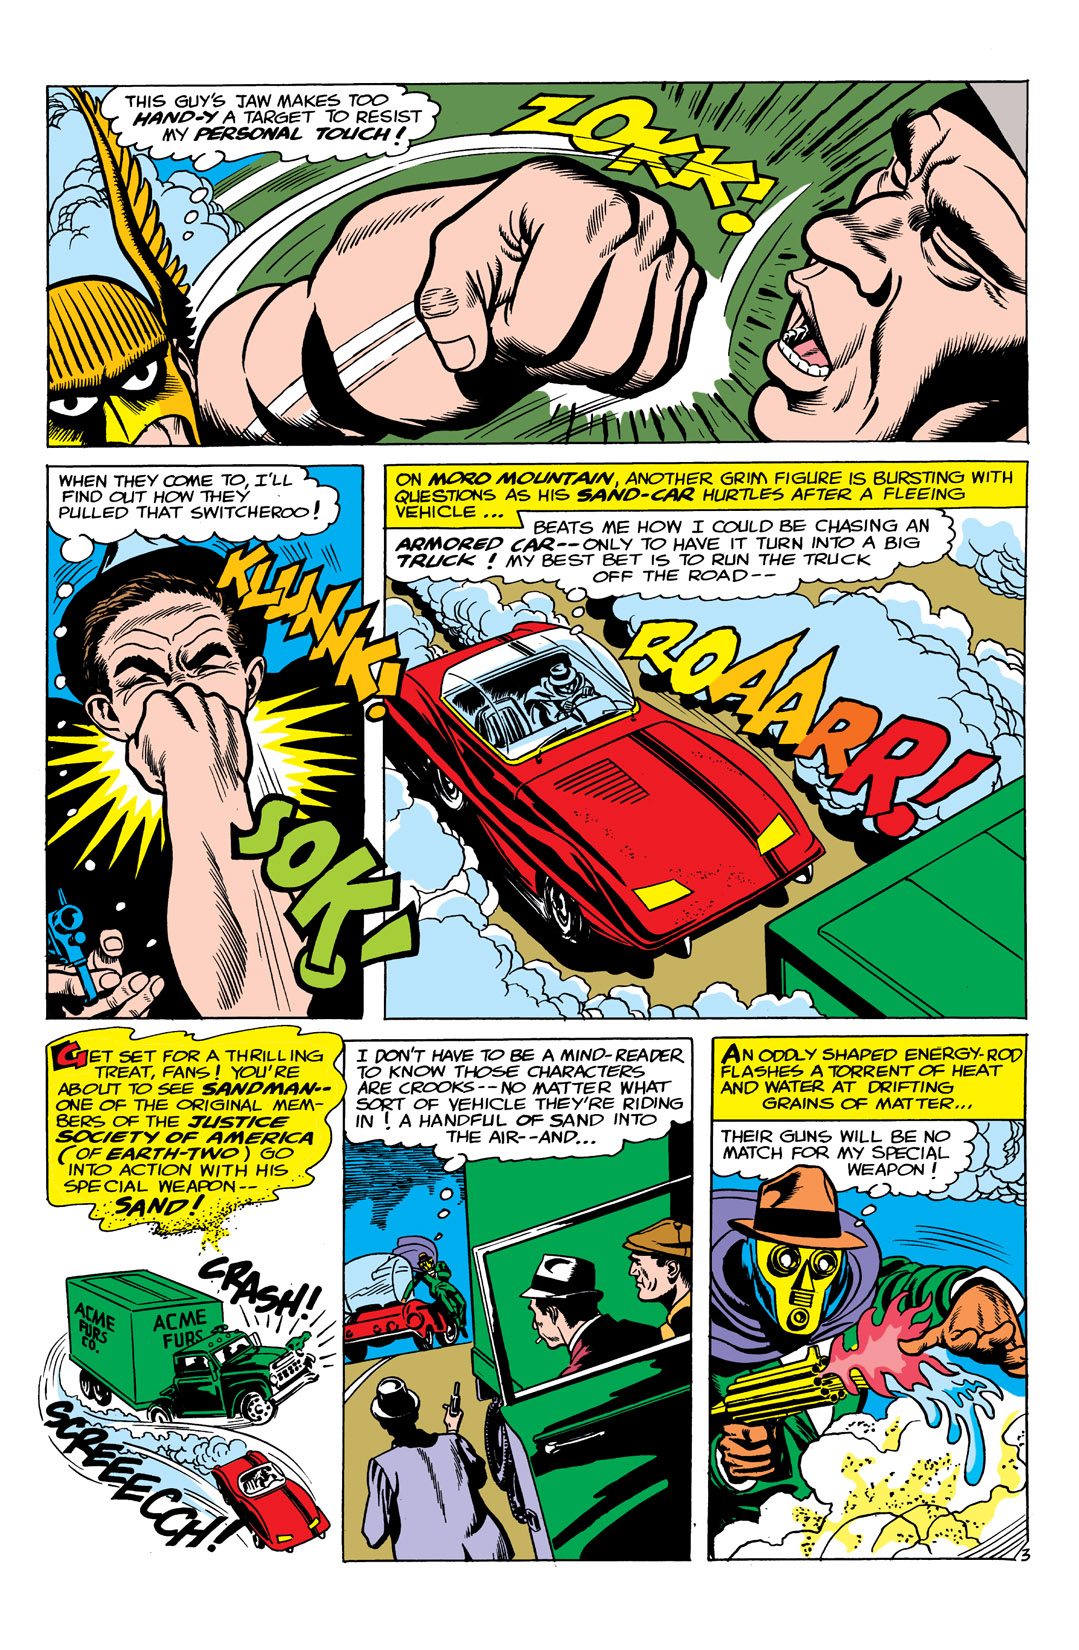 Crisis on Multiple Earths Omnibus: Chapter Crisis-on-Multiple-Earths-7 - Page 4